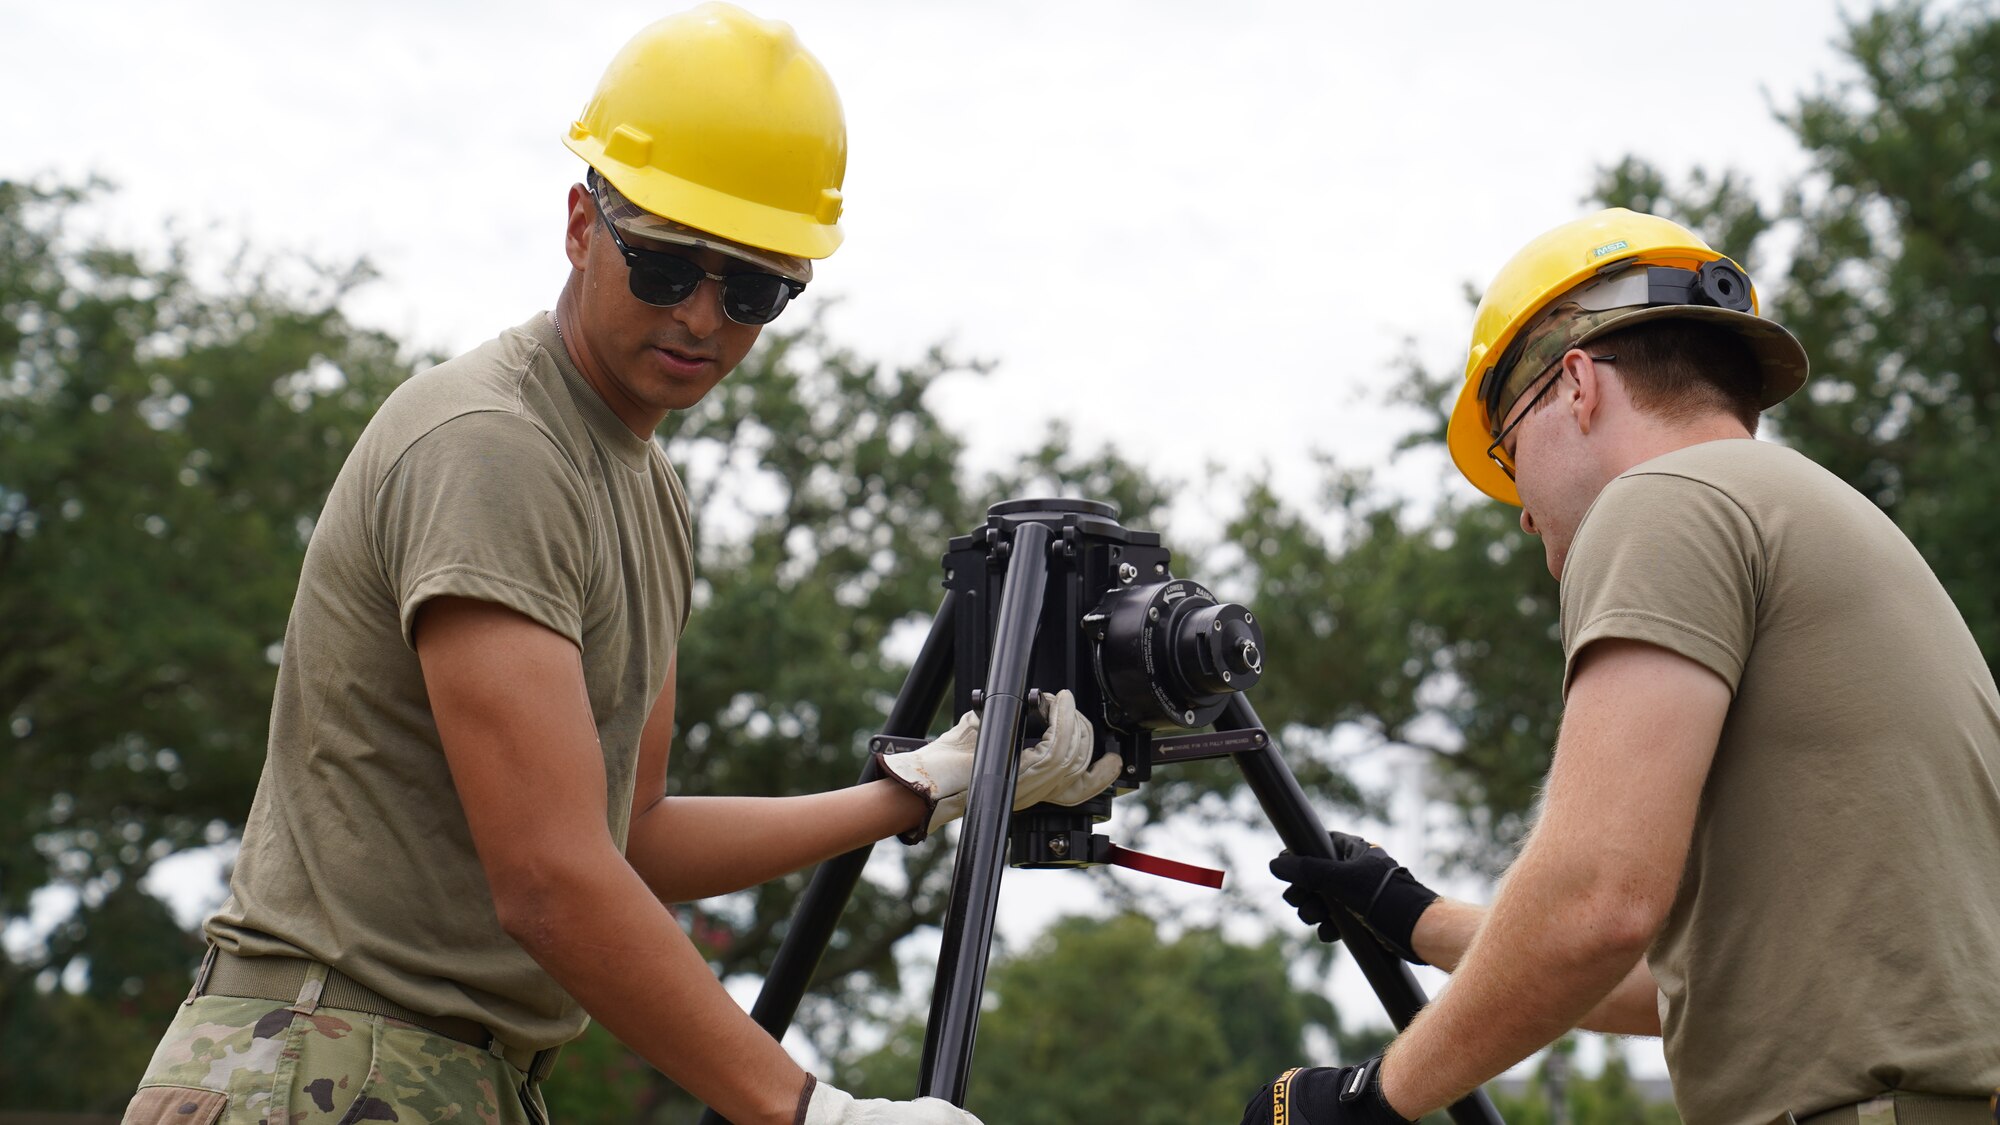 U.S. Air Force Airman Francisco Rebolledo and Airman 1st Class James Miller, 338th Training Squadron Radio Frequency Transmission Systems students, practice building a Blue Sky antenna mast during class at Keesler Air Force Base, Mississippi, Sept. 6, 2022. The 338th TRS specializes in two pipeline courses, RF Transmissions Systems and Network Operations.